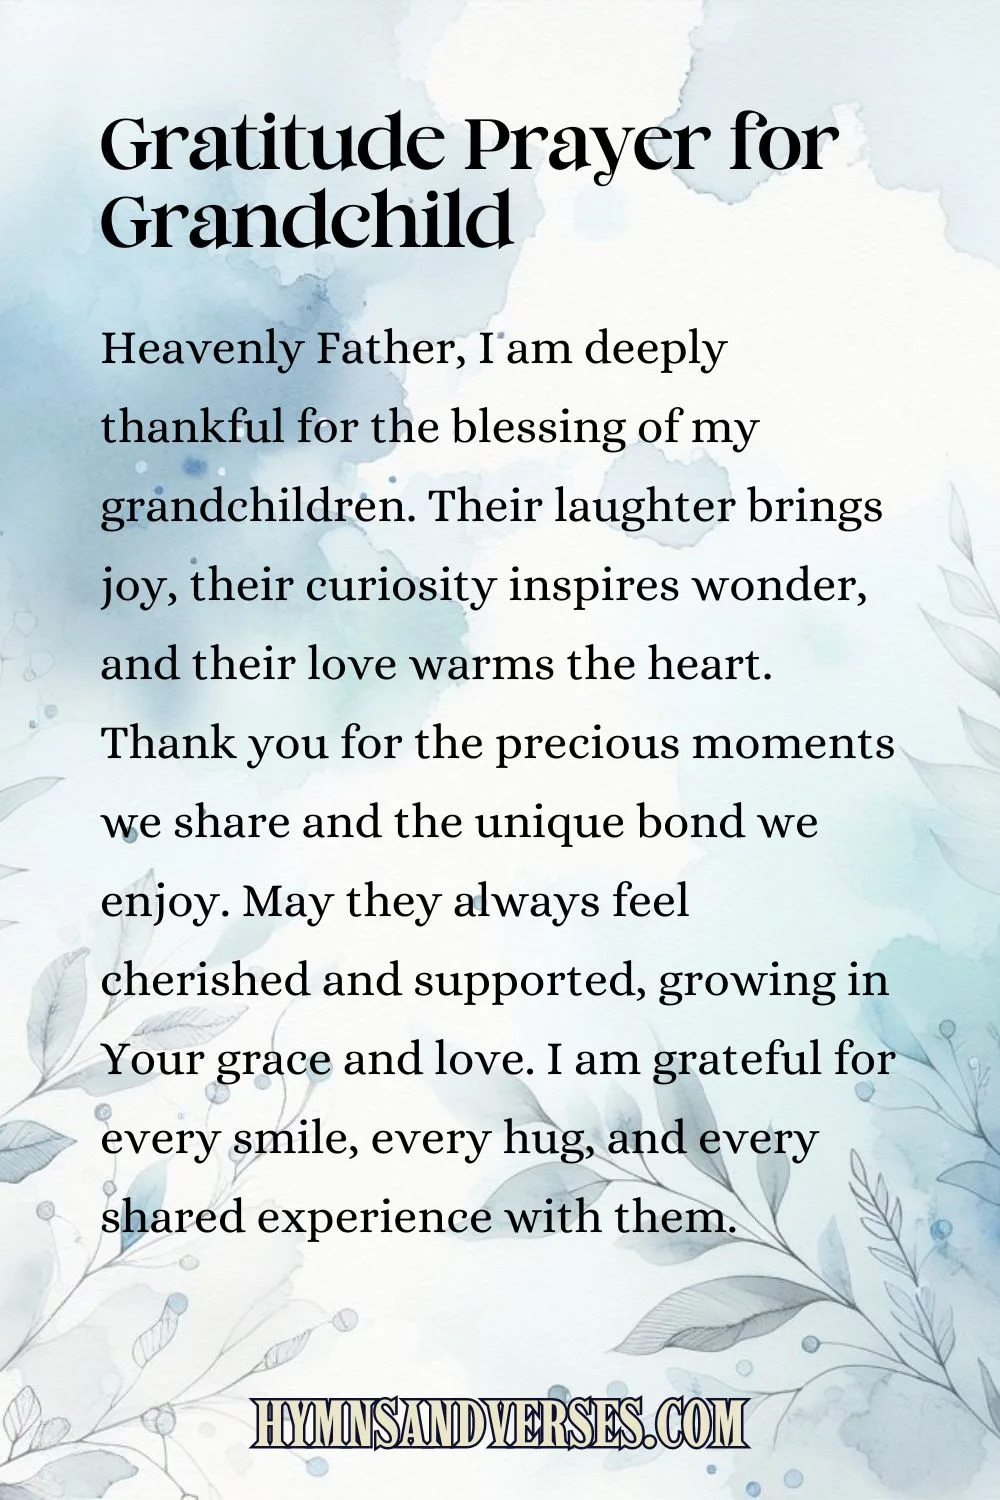 Pin sized image for gratitude prayer for grandchild, reads: Heavenly Father, I am deeply thankful for the blessing of my grandchildren. Their laughter brings joy, their curiosity inspires wonder, and their love warms the heart. Thank you for the precious moments we share and the unique bond we enjoy. May they always feel cherished and supported, growing in Your grace and love. I am grateful for every smile, every hug, and every shared experience with them.